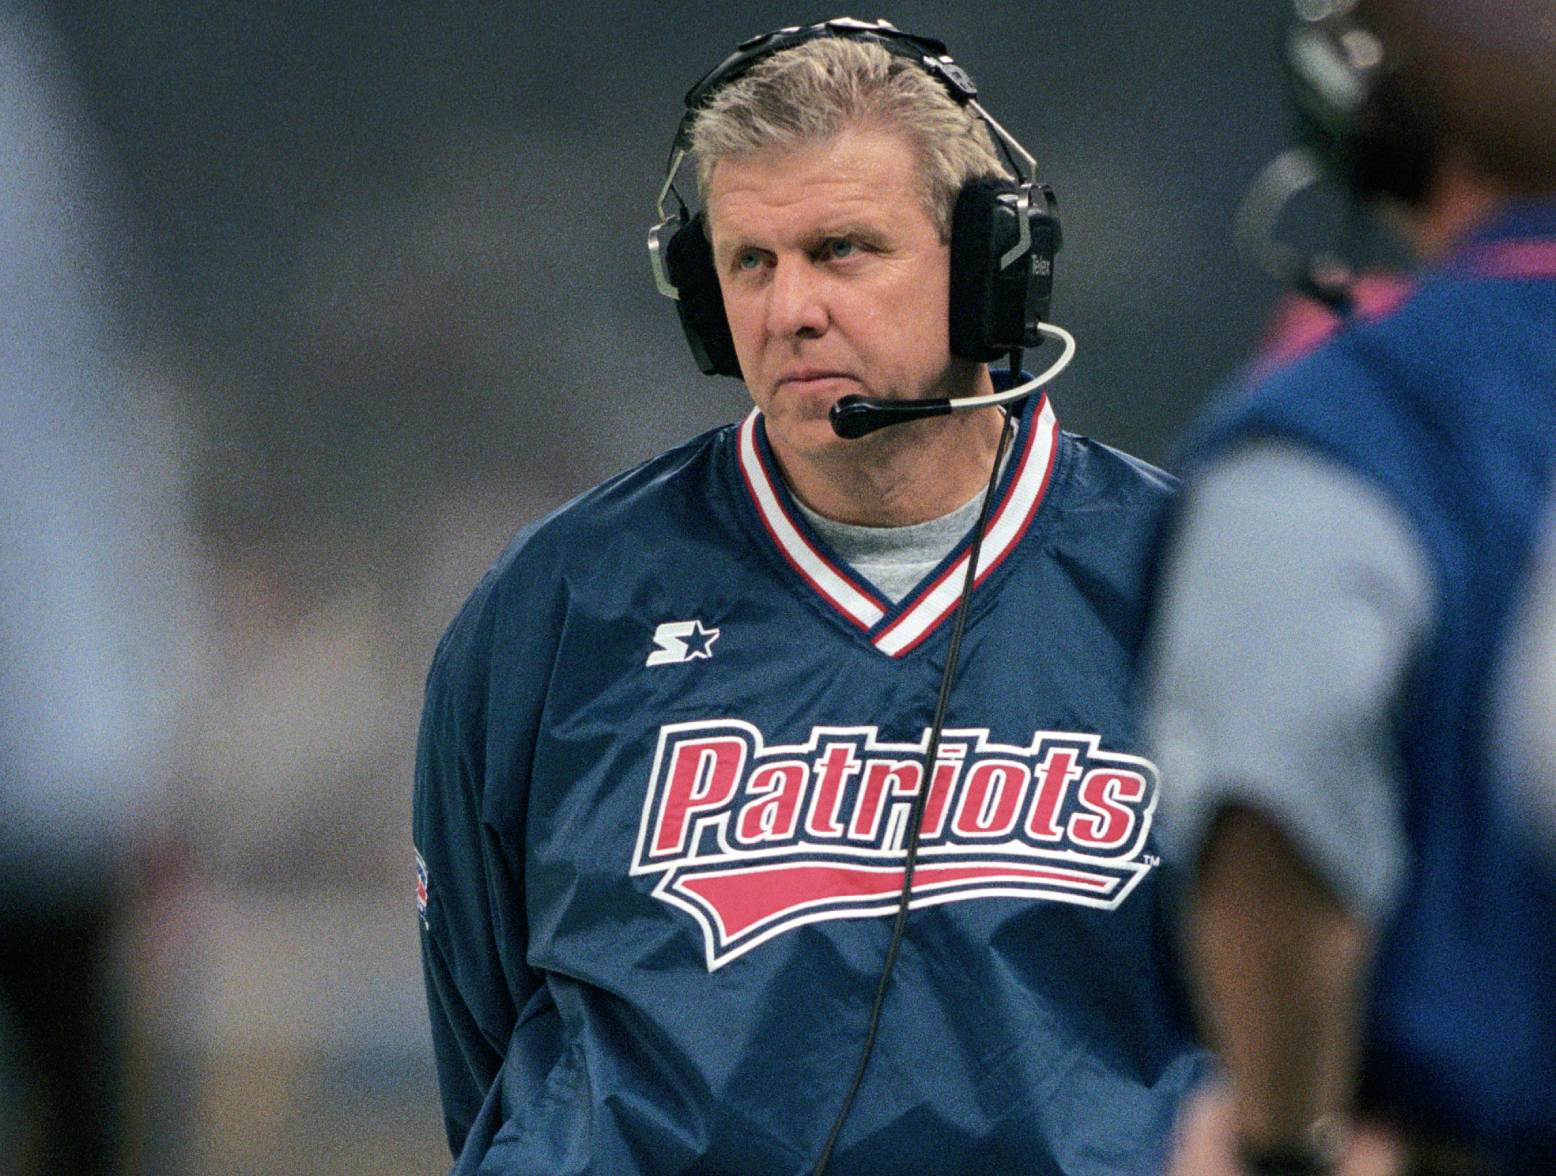 Jan 26, 1997; New Orleans, LA, USA; New England Patriots head coach Bill Parcells reacts on the sideline against the Green Bay Packers for Super Bowl XXXI at the Superdome. The Packers defeated the Patriots 35-21. Credit: USA TODAY Sports